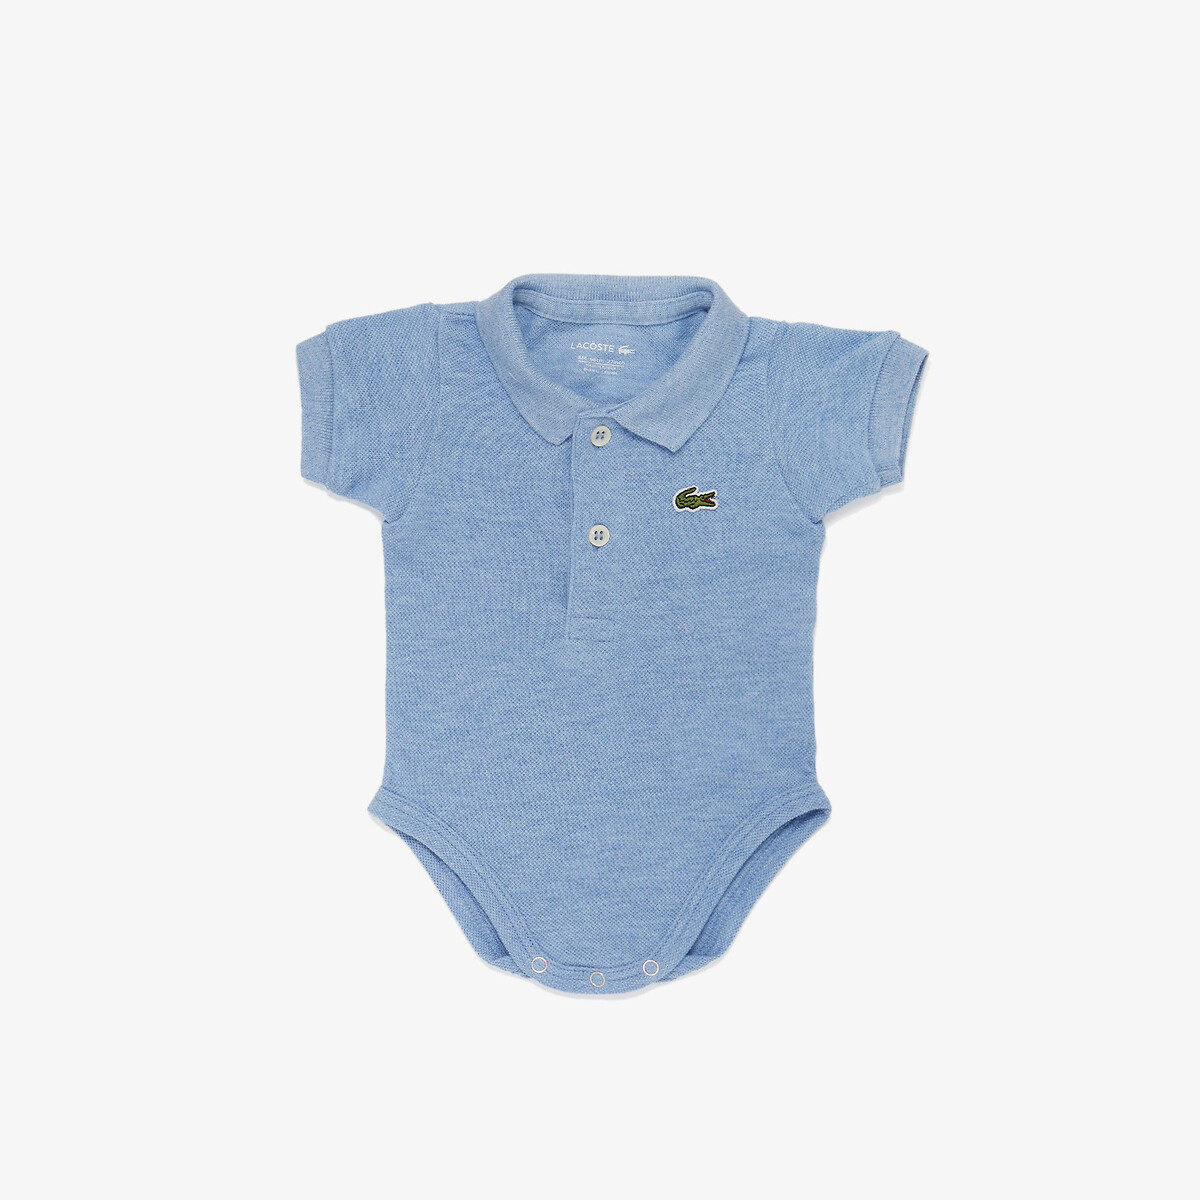 Image of Baby's Cotton Pique Bodysuit with Gift Box